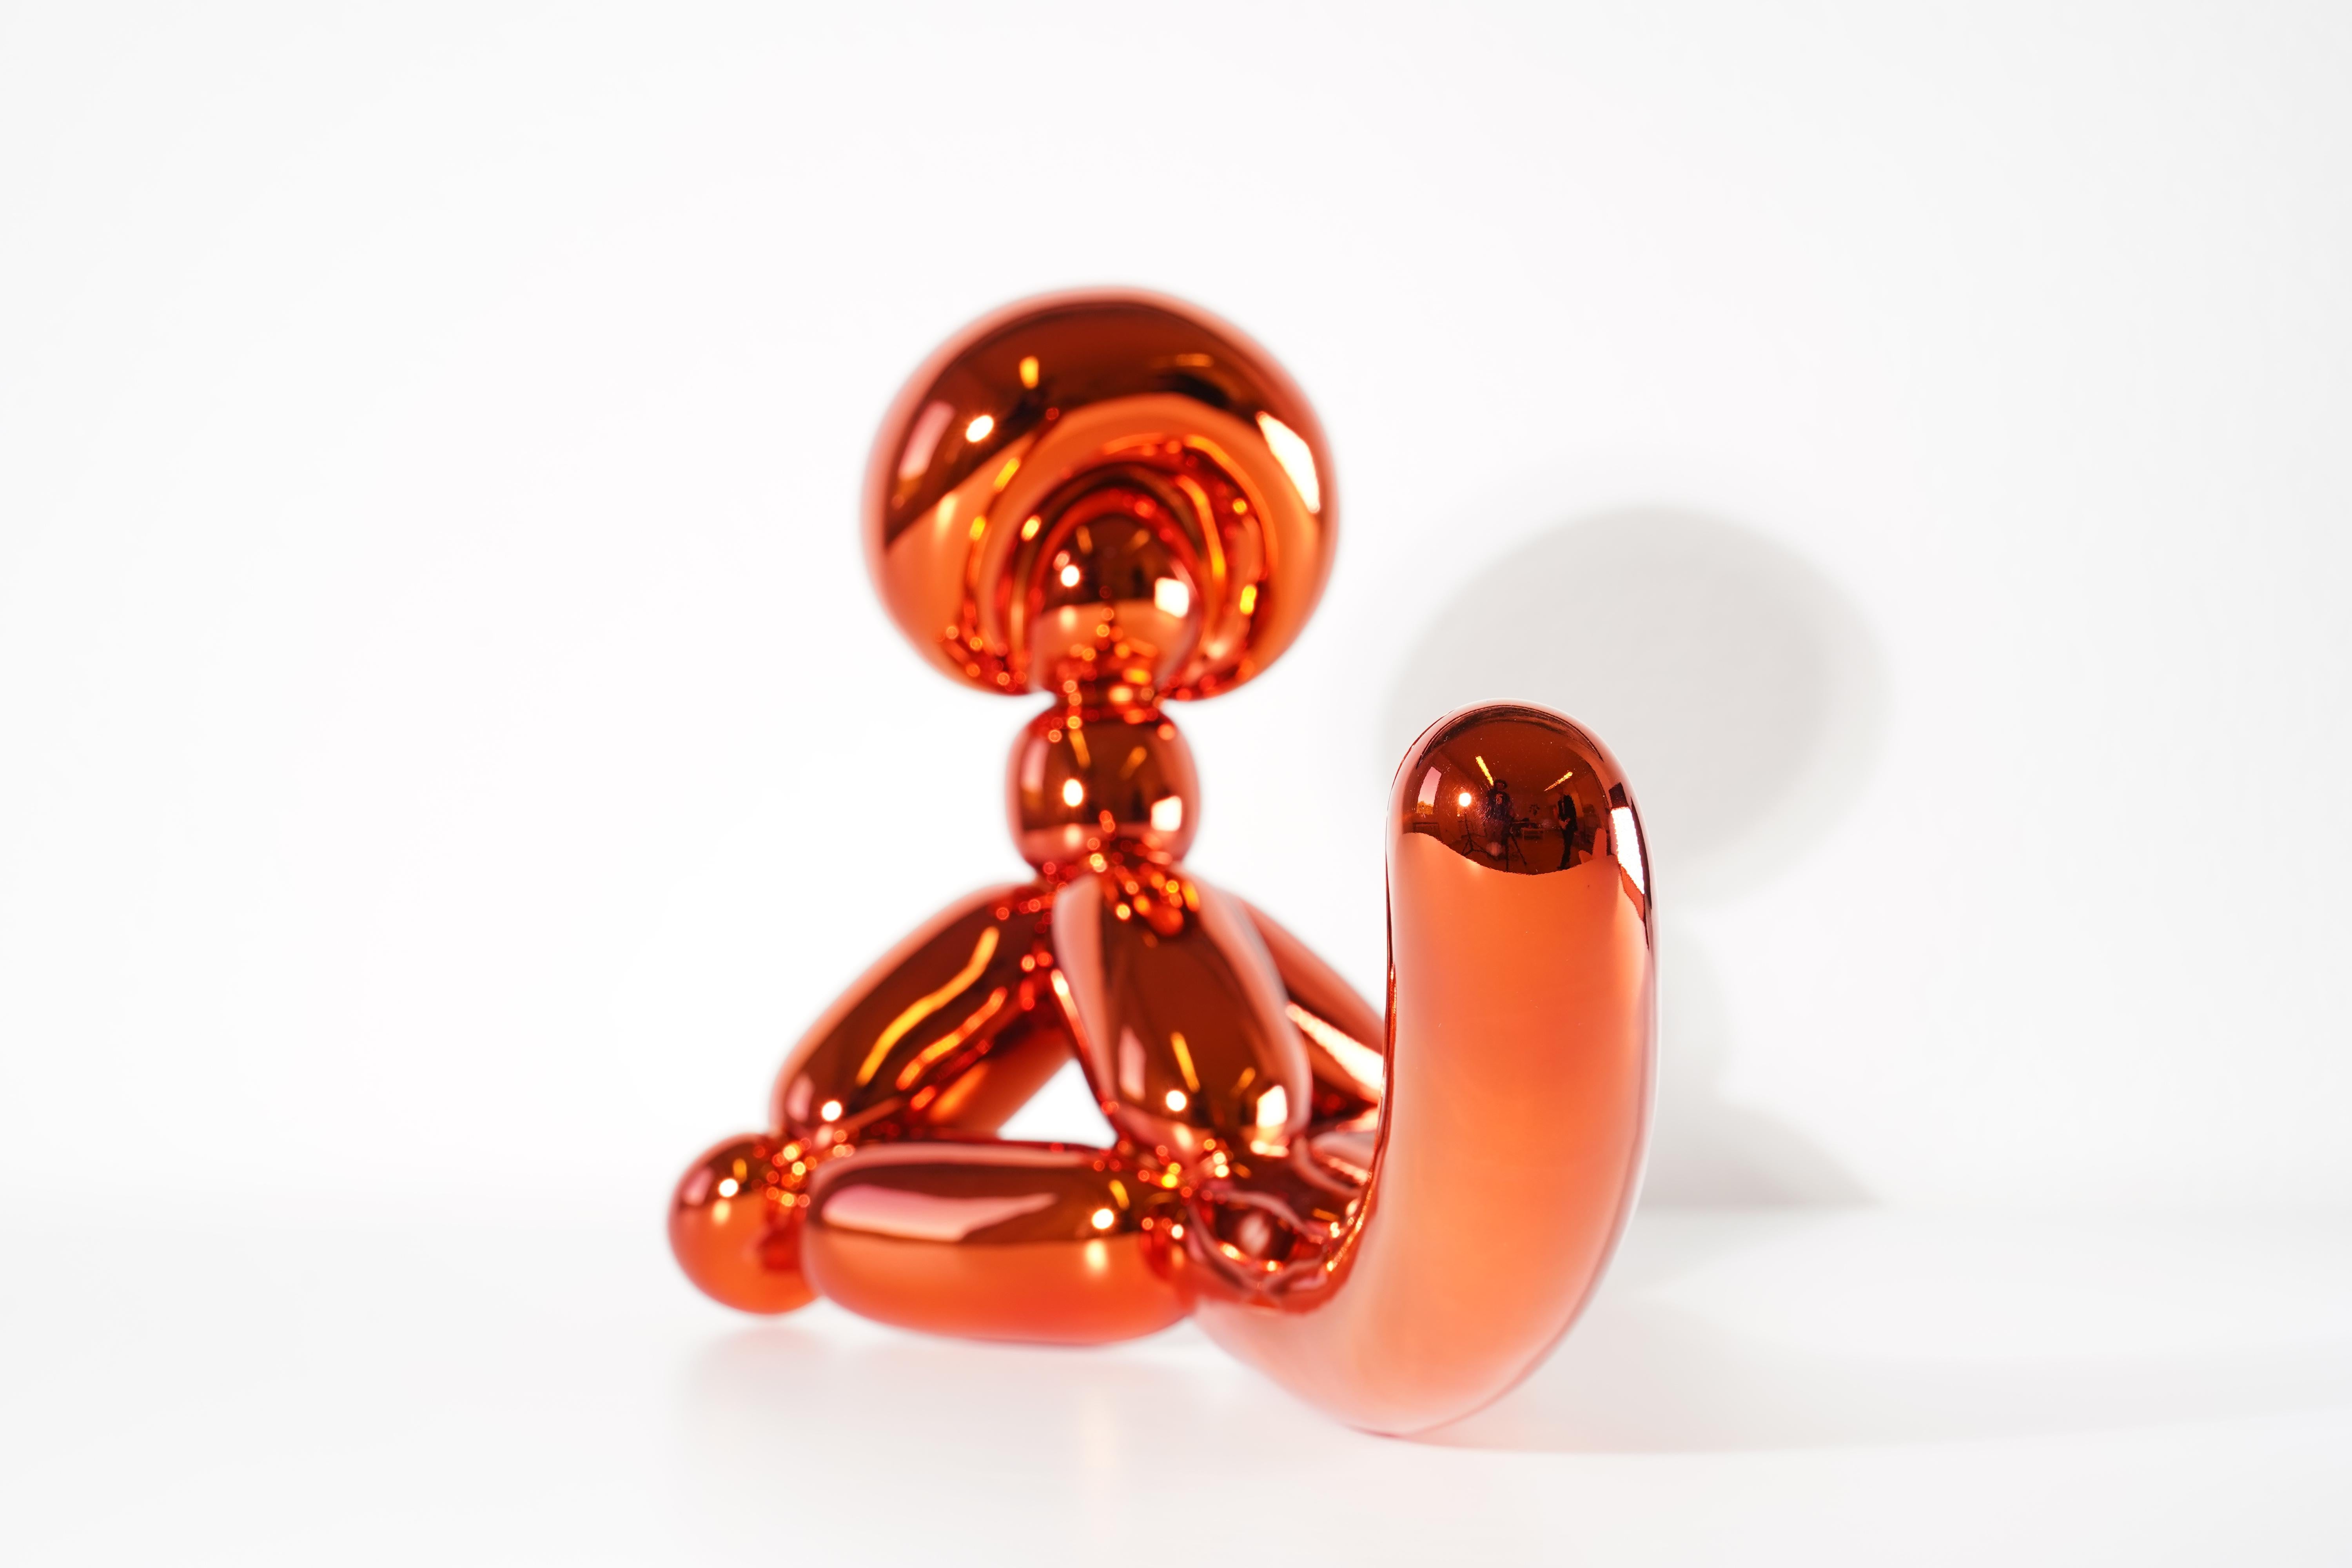 Balloon Monkey (Orange) - Jeff Koons, 21st Century, Contemporary, Porcelain, Sculpture, Decor, Limited Edition

Limoges porcelain with chromatic metalized coating
Edition of 999
Signed and numbered
In mint condition, as acquired from the